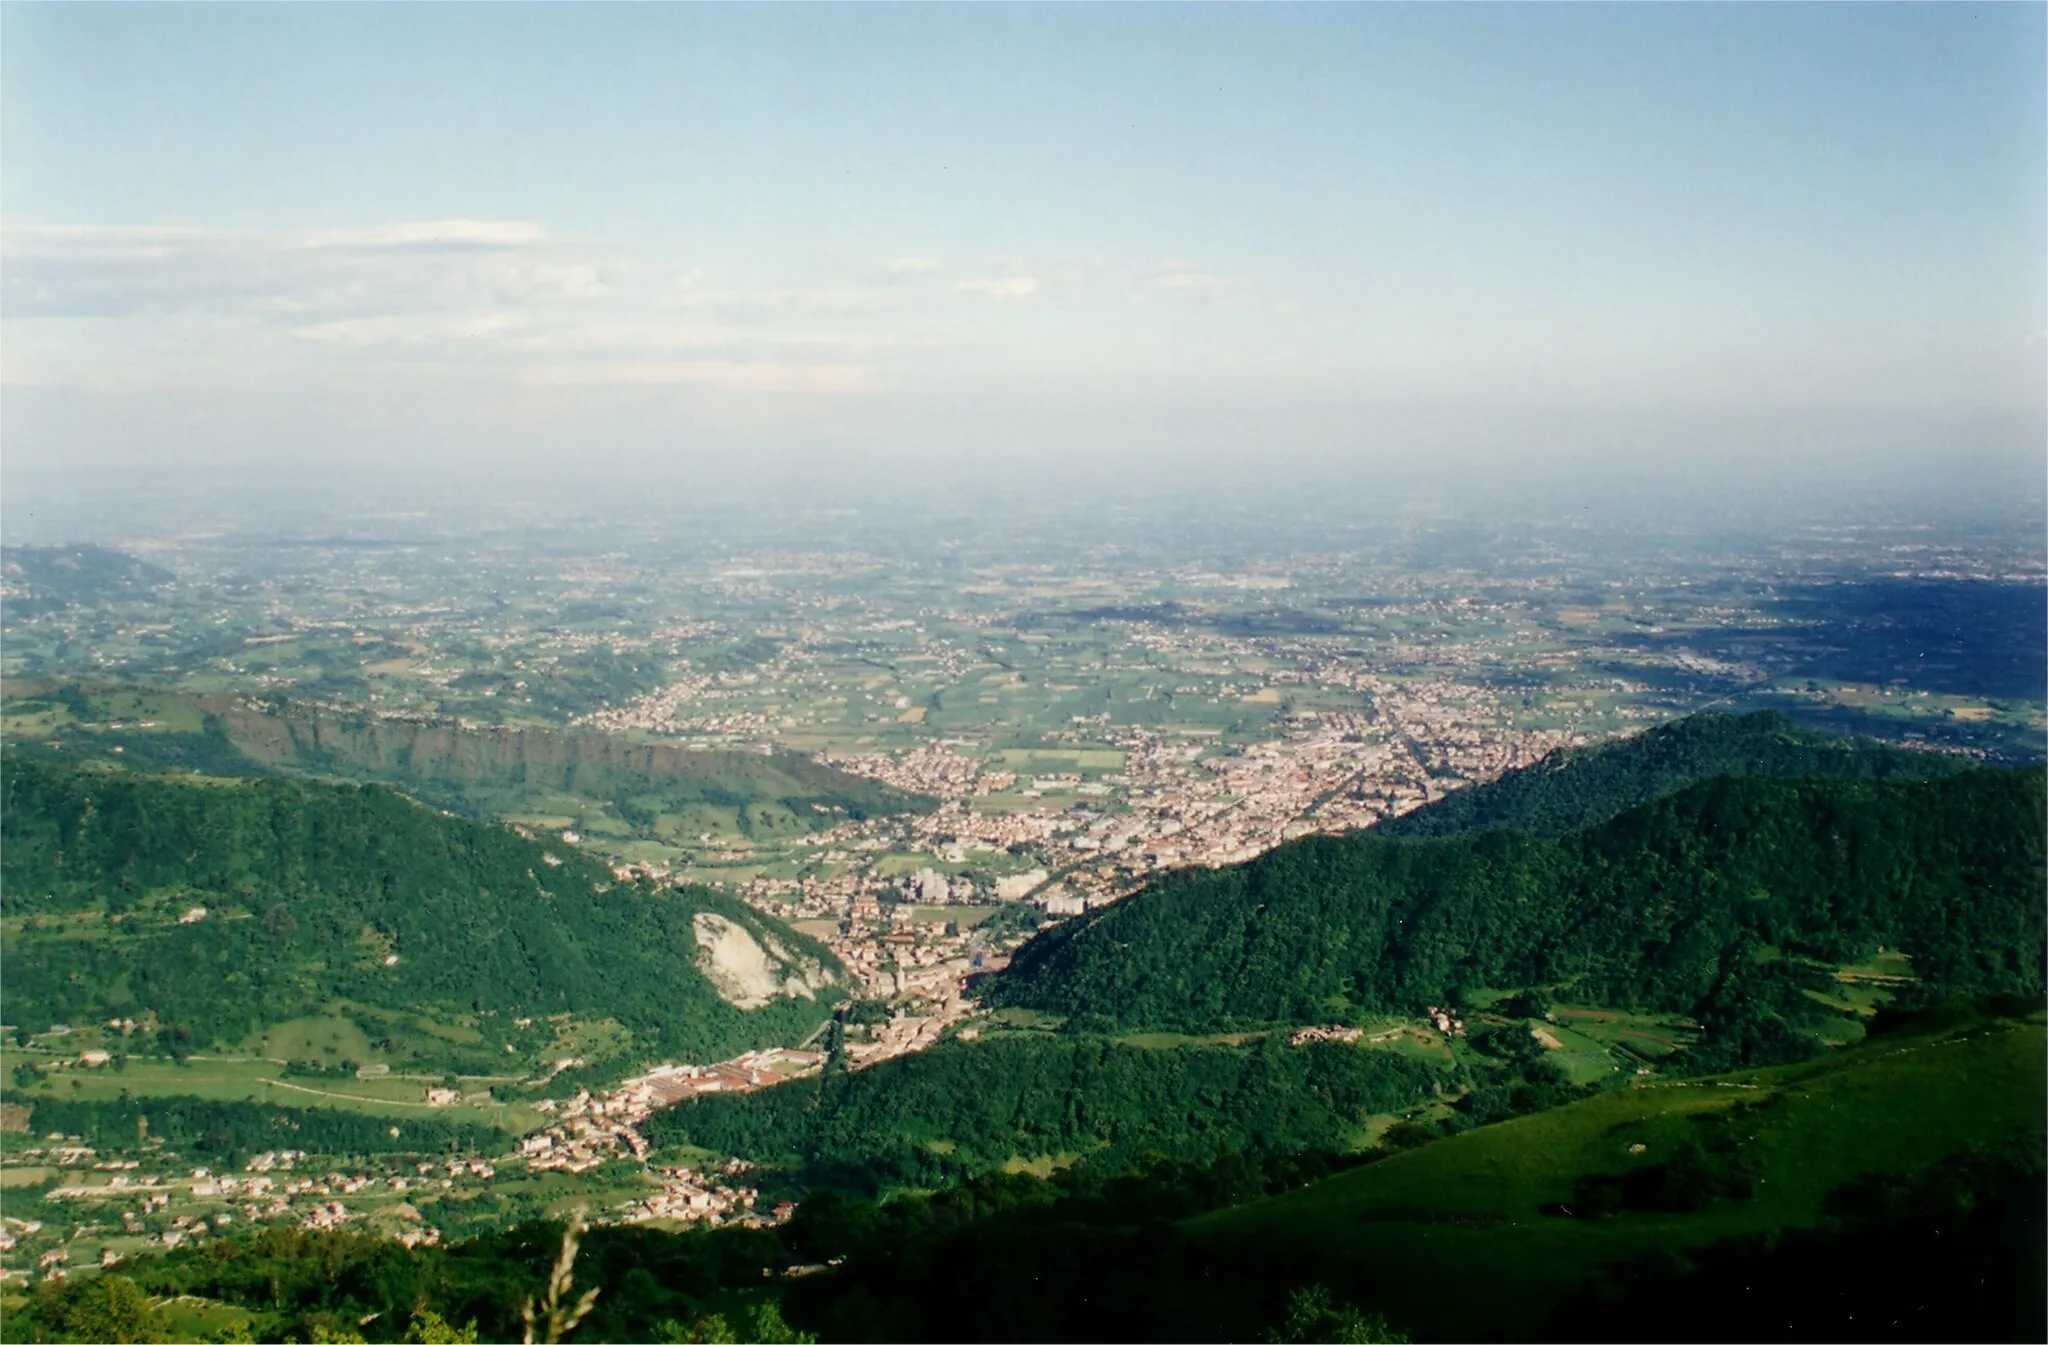 Photo showing: The Town of Vittorio Veneto in the Treviso province of Veneto, Italy, seen from the Col Visentin